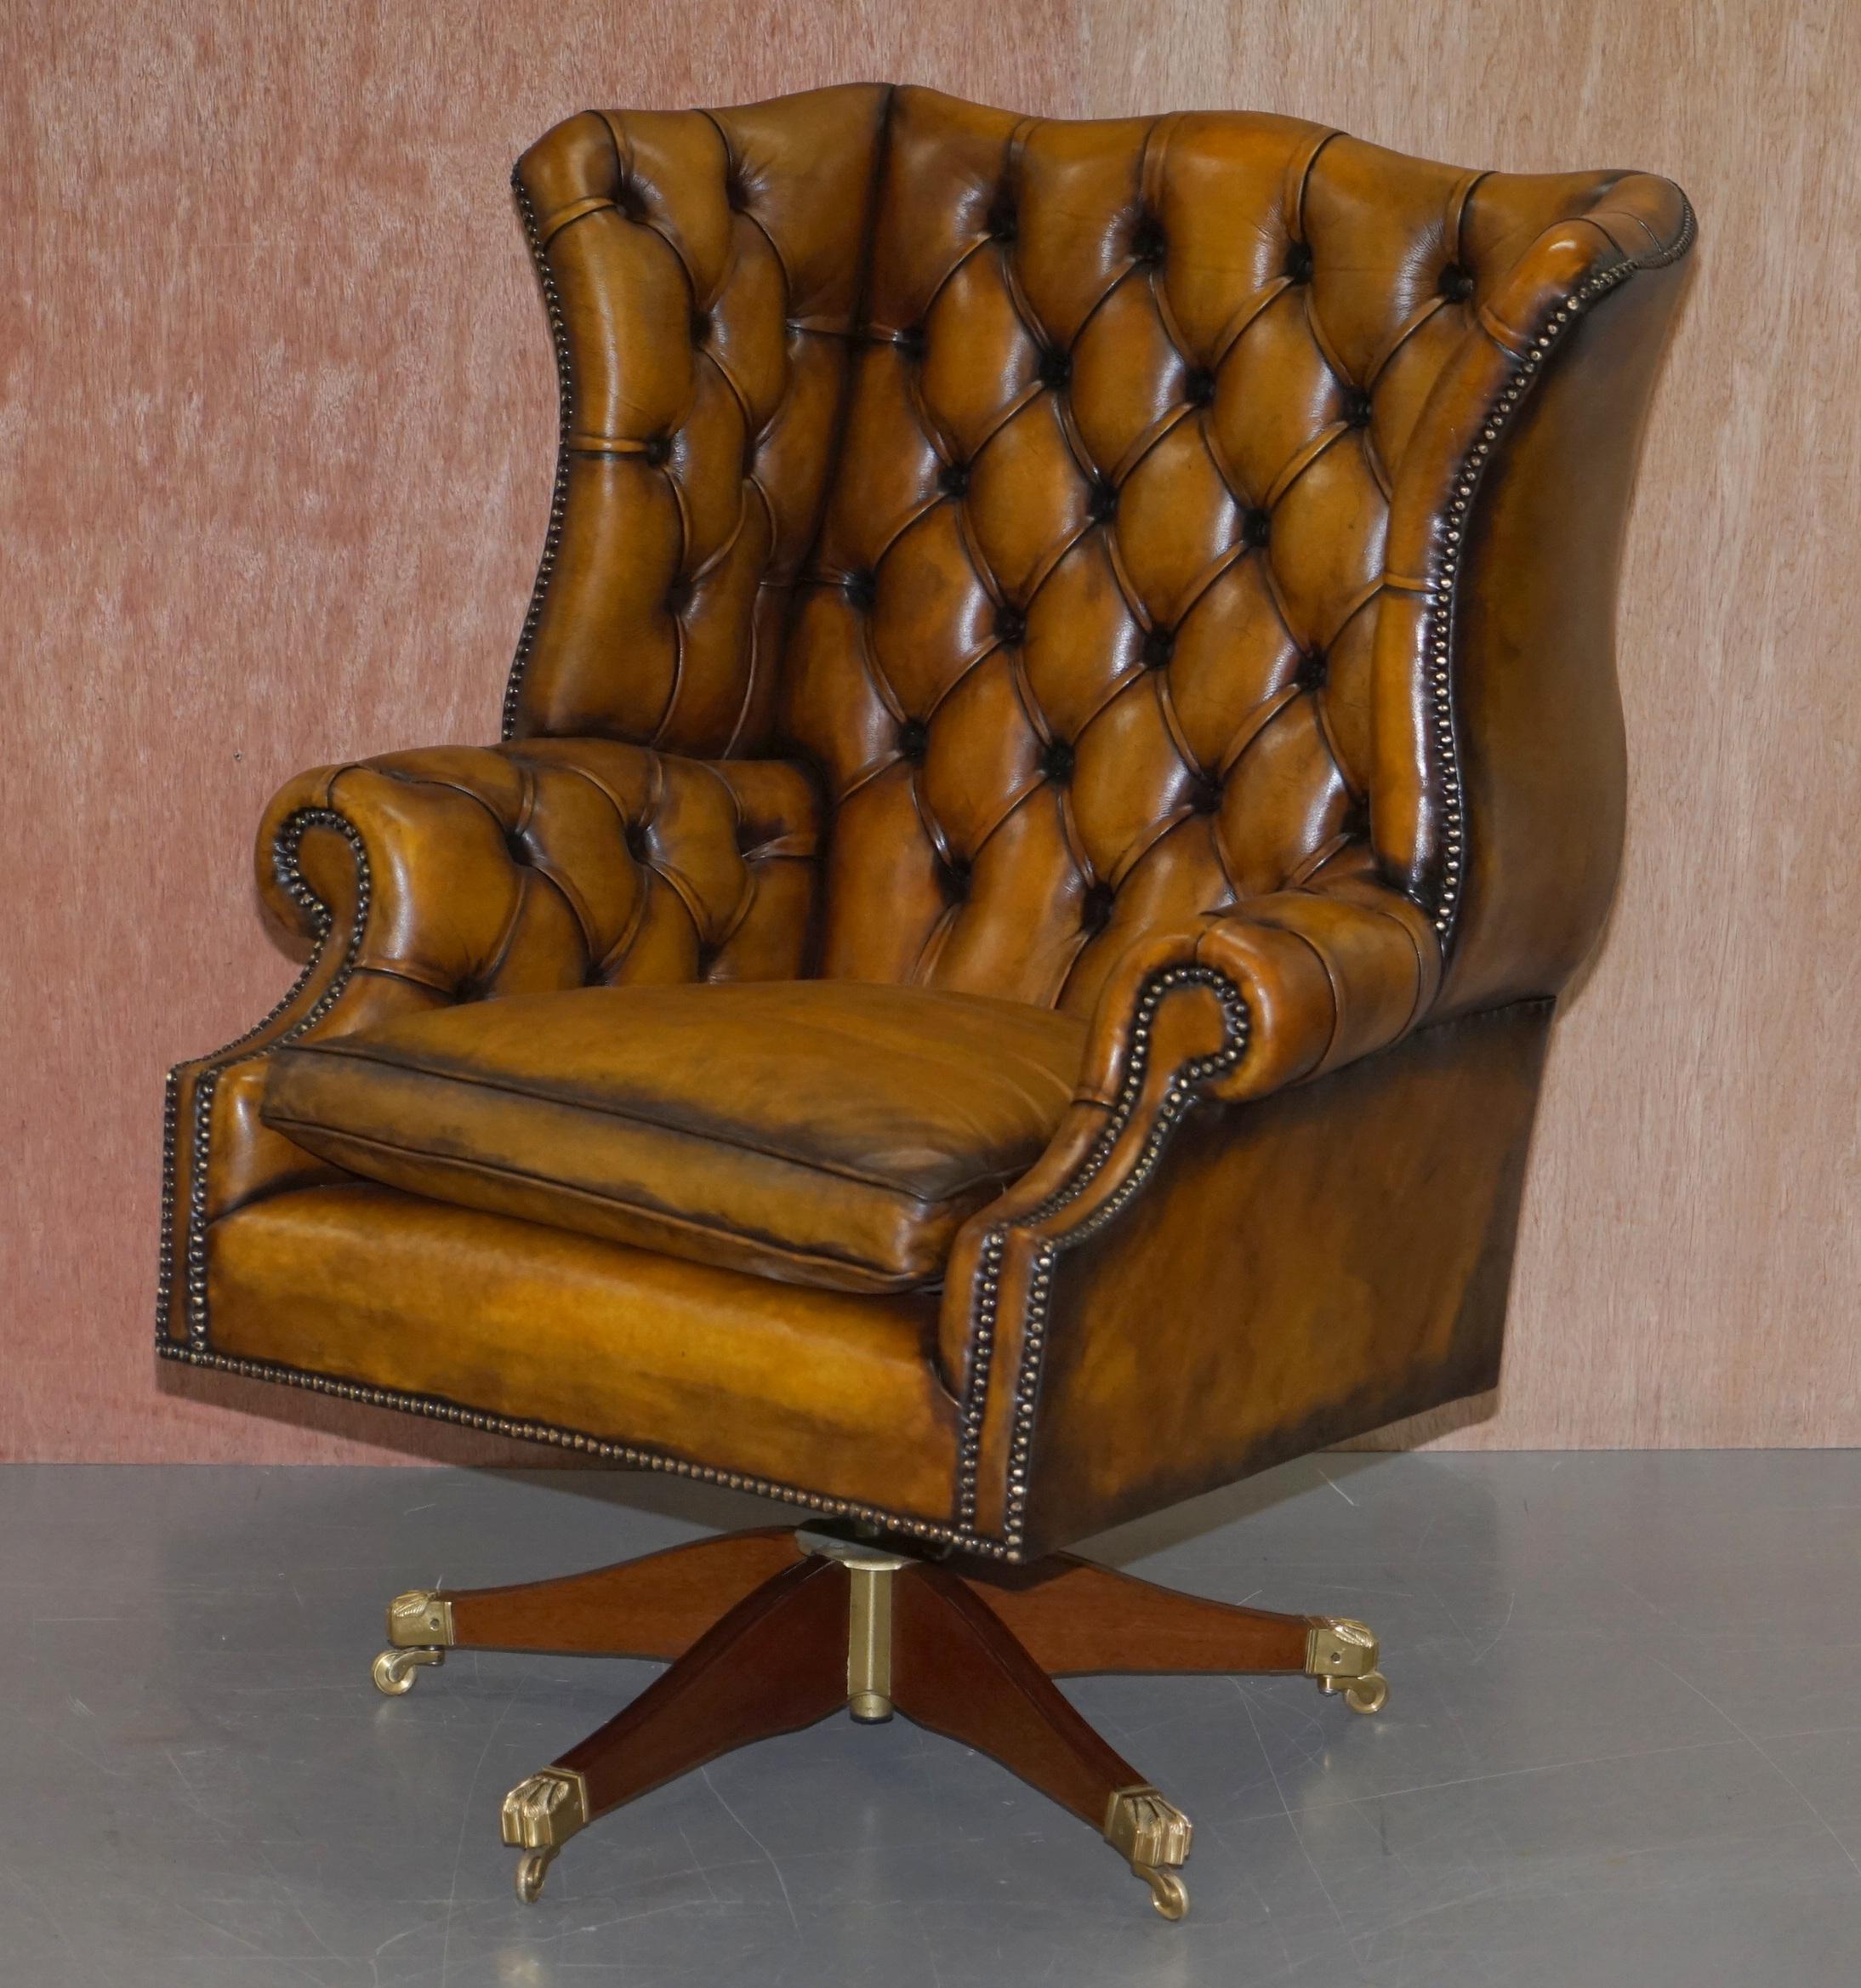 English Harrods 1960s Fully Restored Aged Leather Chesterfield Directors Office Chair